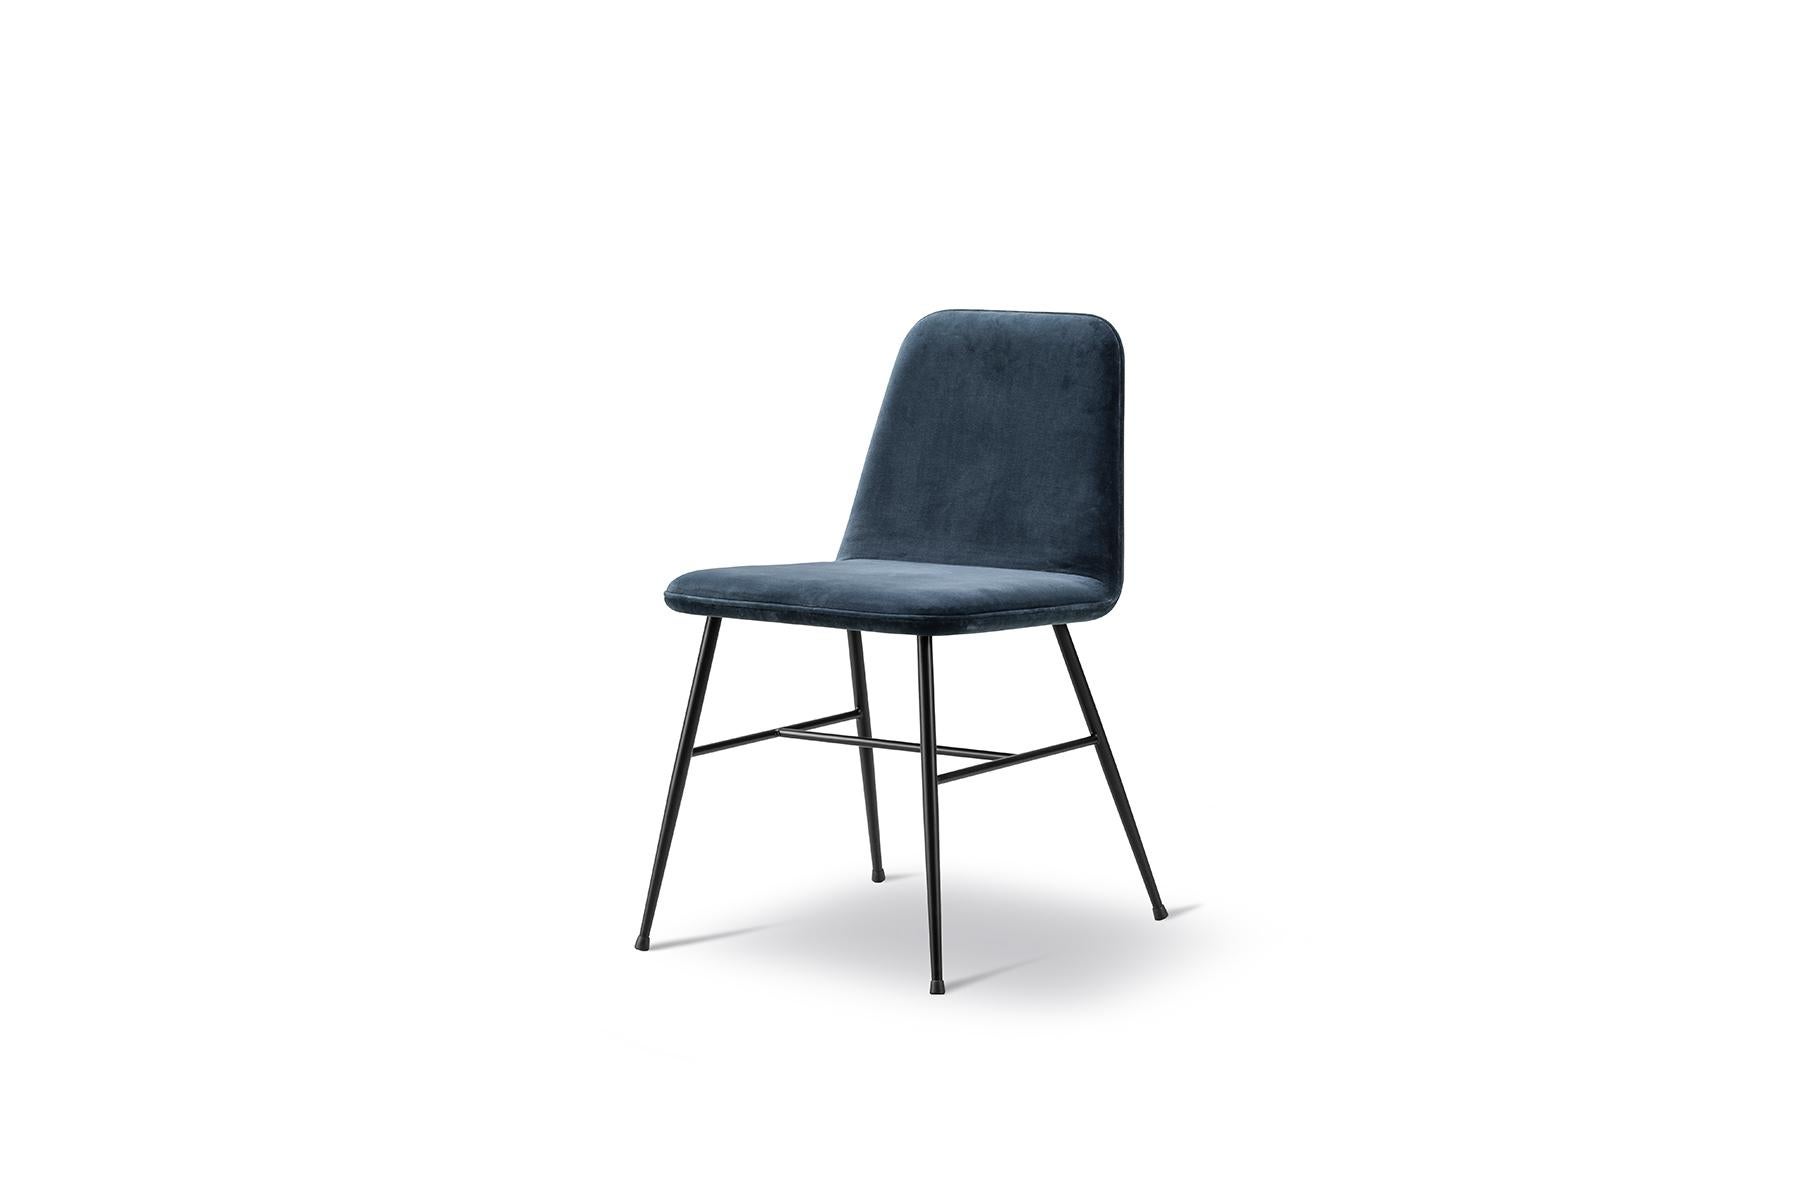 Space Copenhagen spine chair, metal base a clean and modern visual language characterizes the Spine collection, and this latest addition of a metal base strengthens the stunning expression of the family. The simple lines of the metal leg infuse the